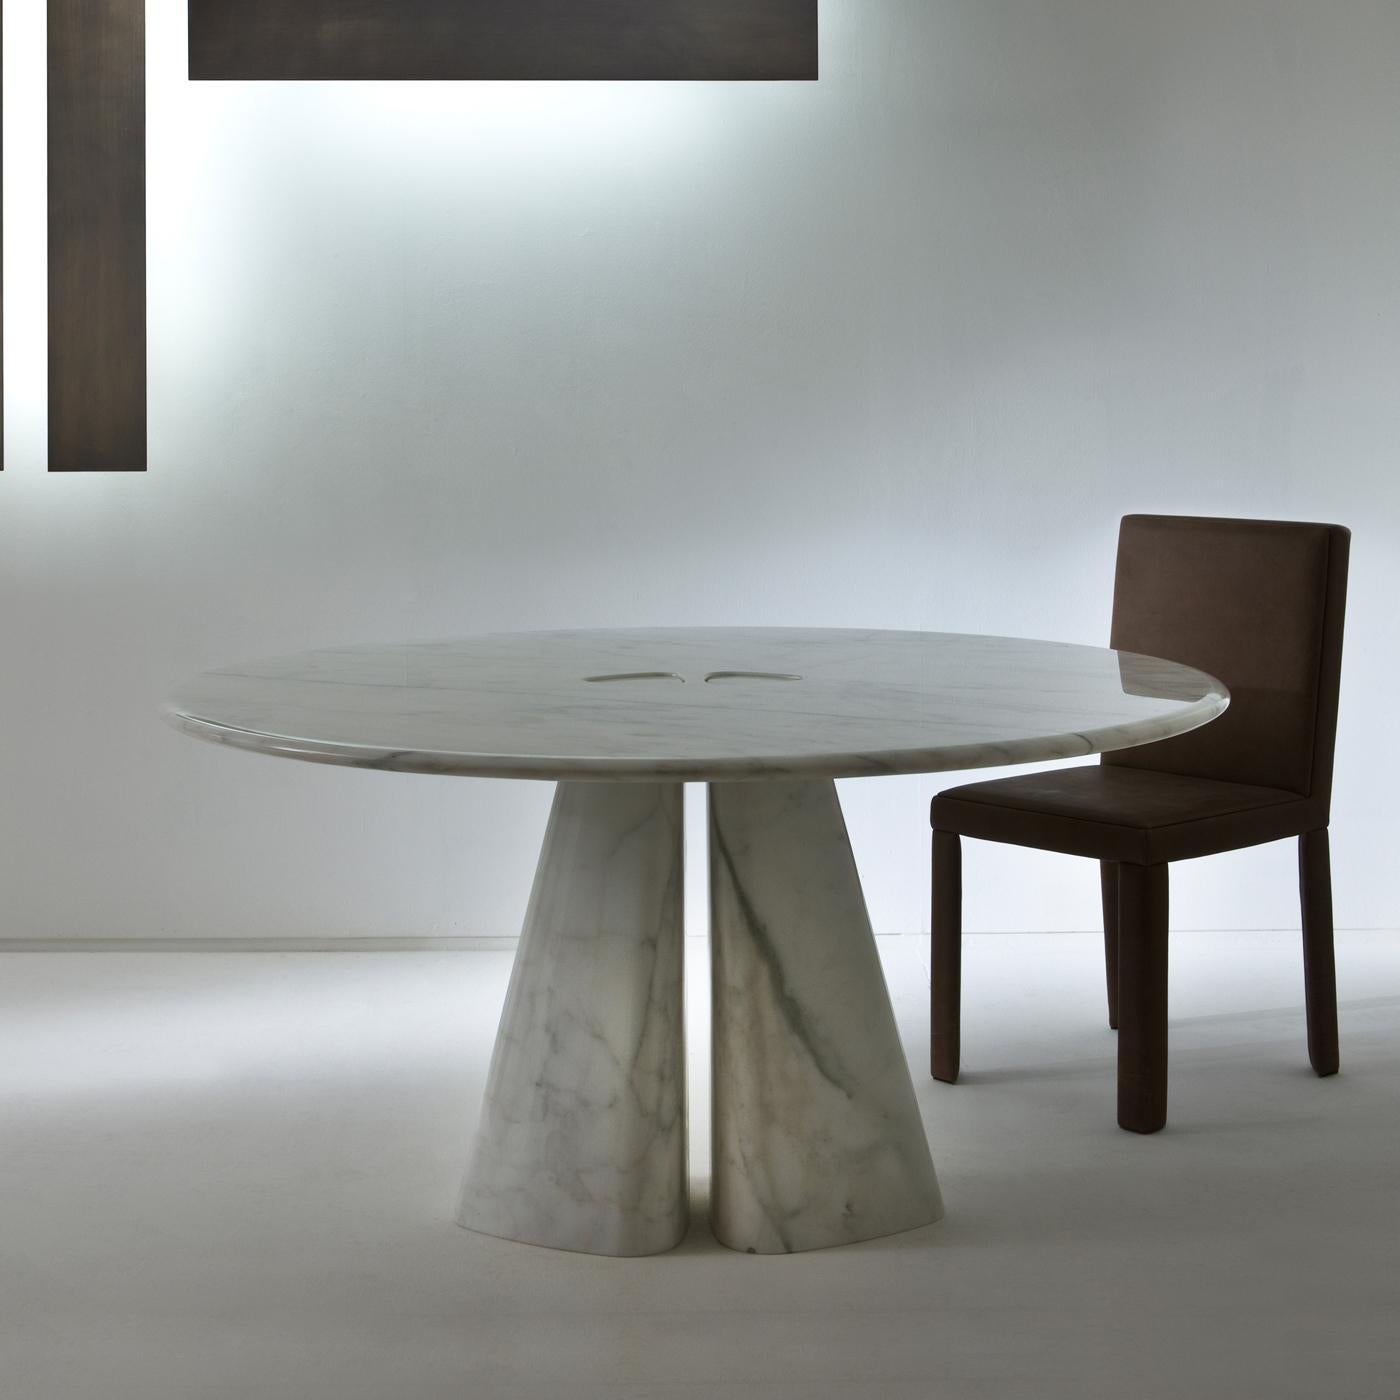 This unique table, designed by Bartoli Design, is entirely made in precious white Calacatta marble and is comprised of a two-element base that joins the round top with a Minimalist yet sophisticated design that combines the finest material with a